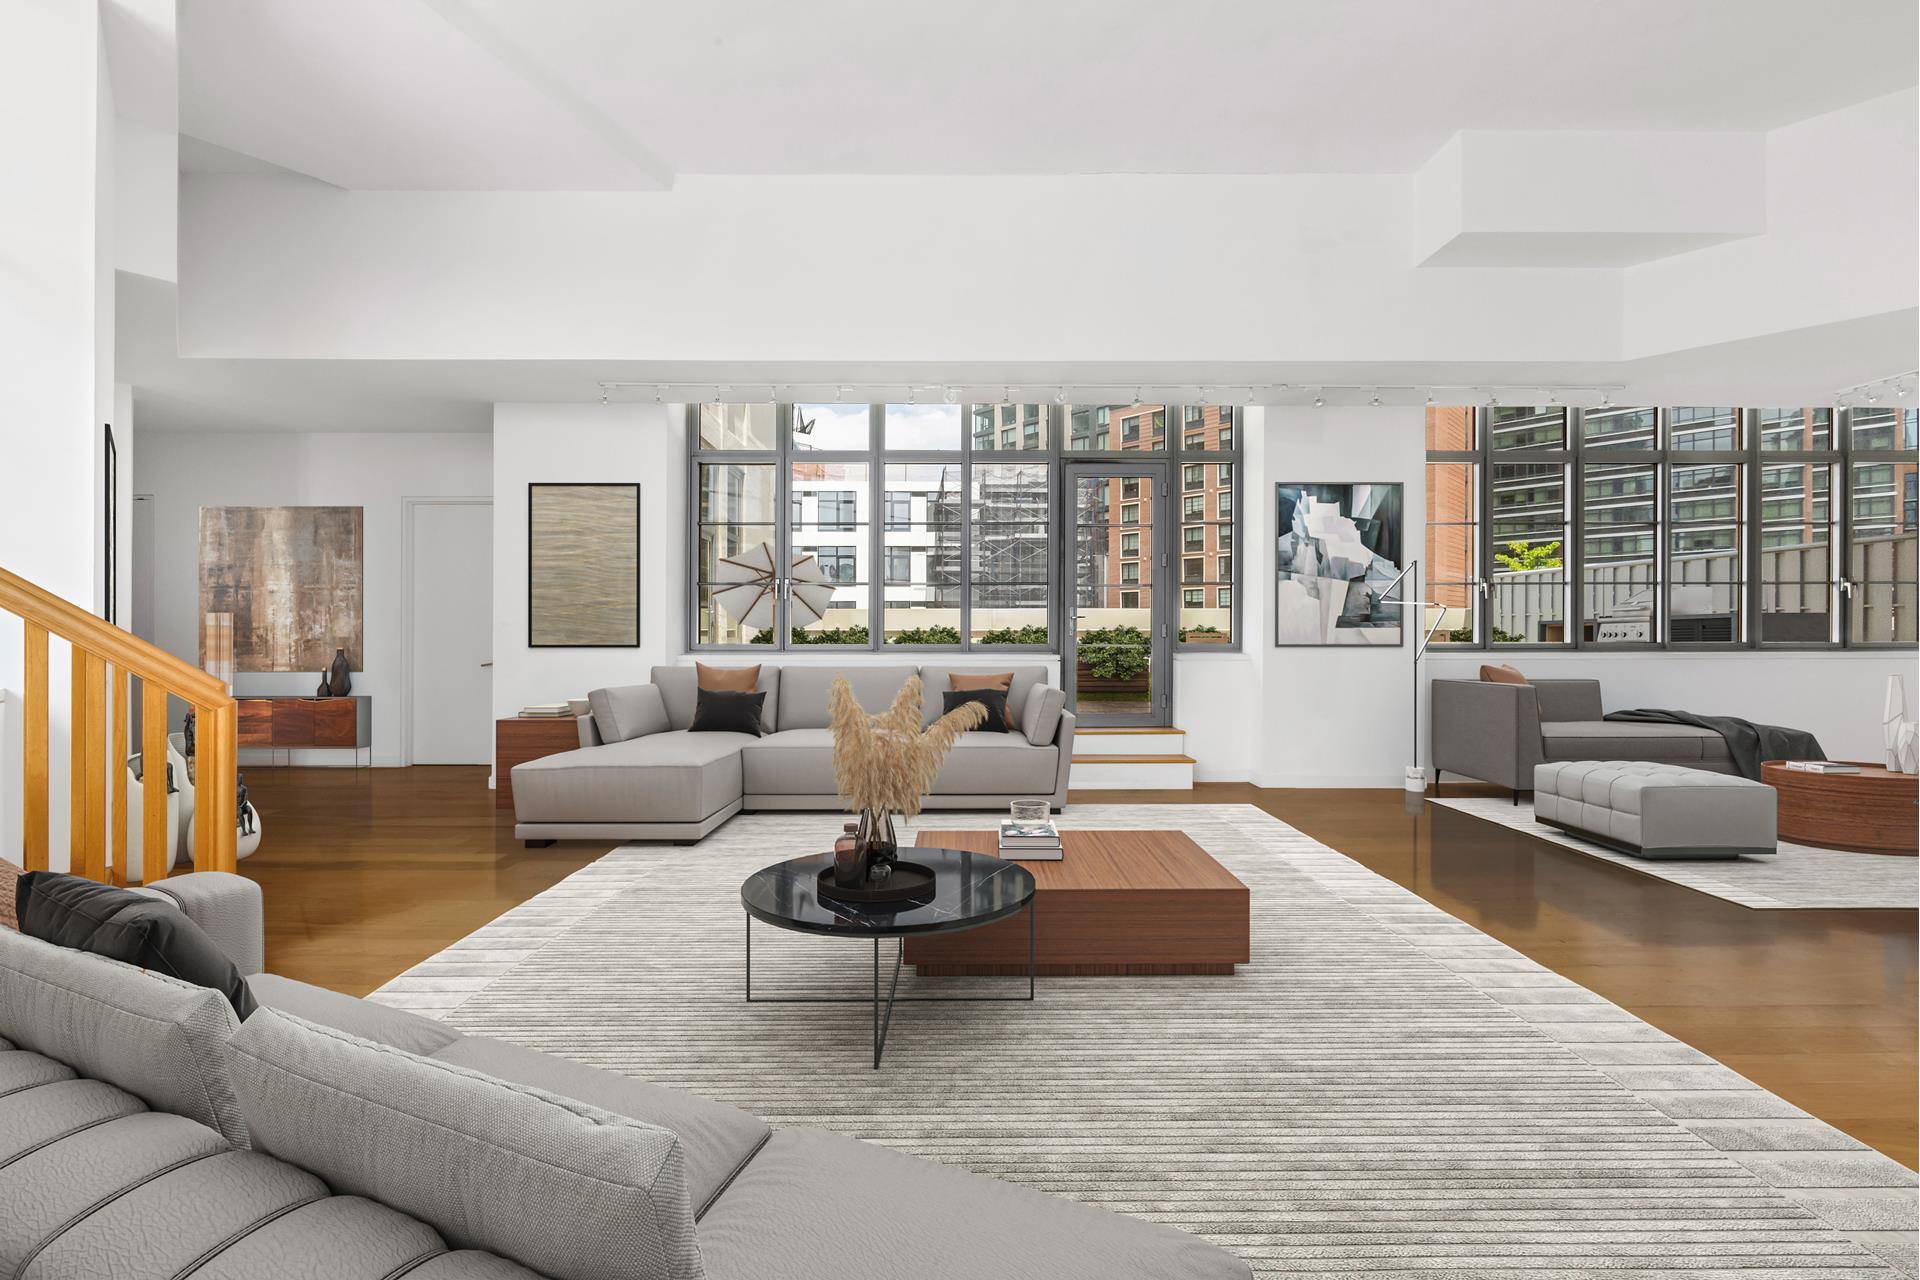 Introducing Loft 620 at the Arris Lofts A rare opportunity to own the largest private residence in Long Island City, available for the first time on the market since the ...